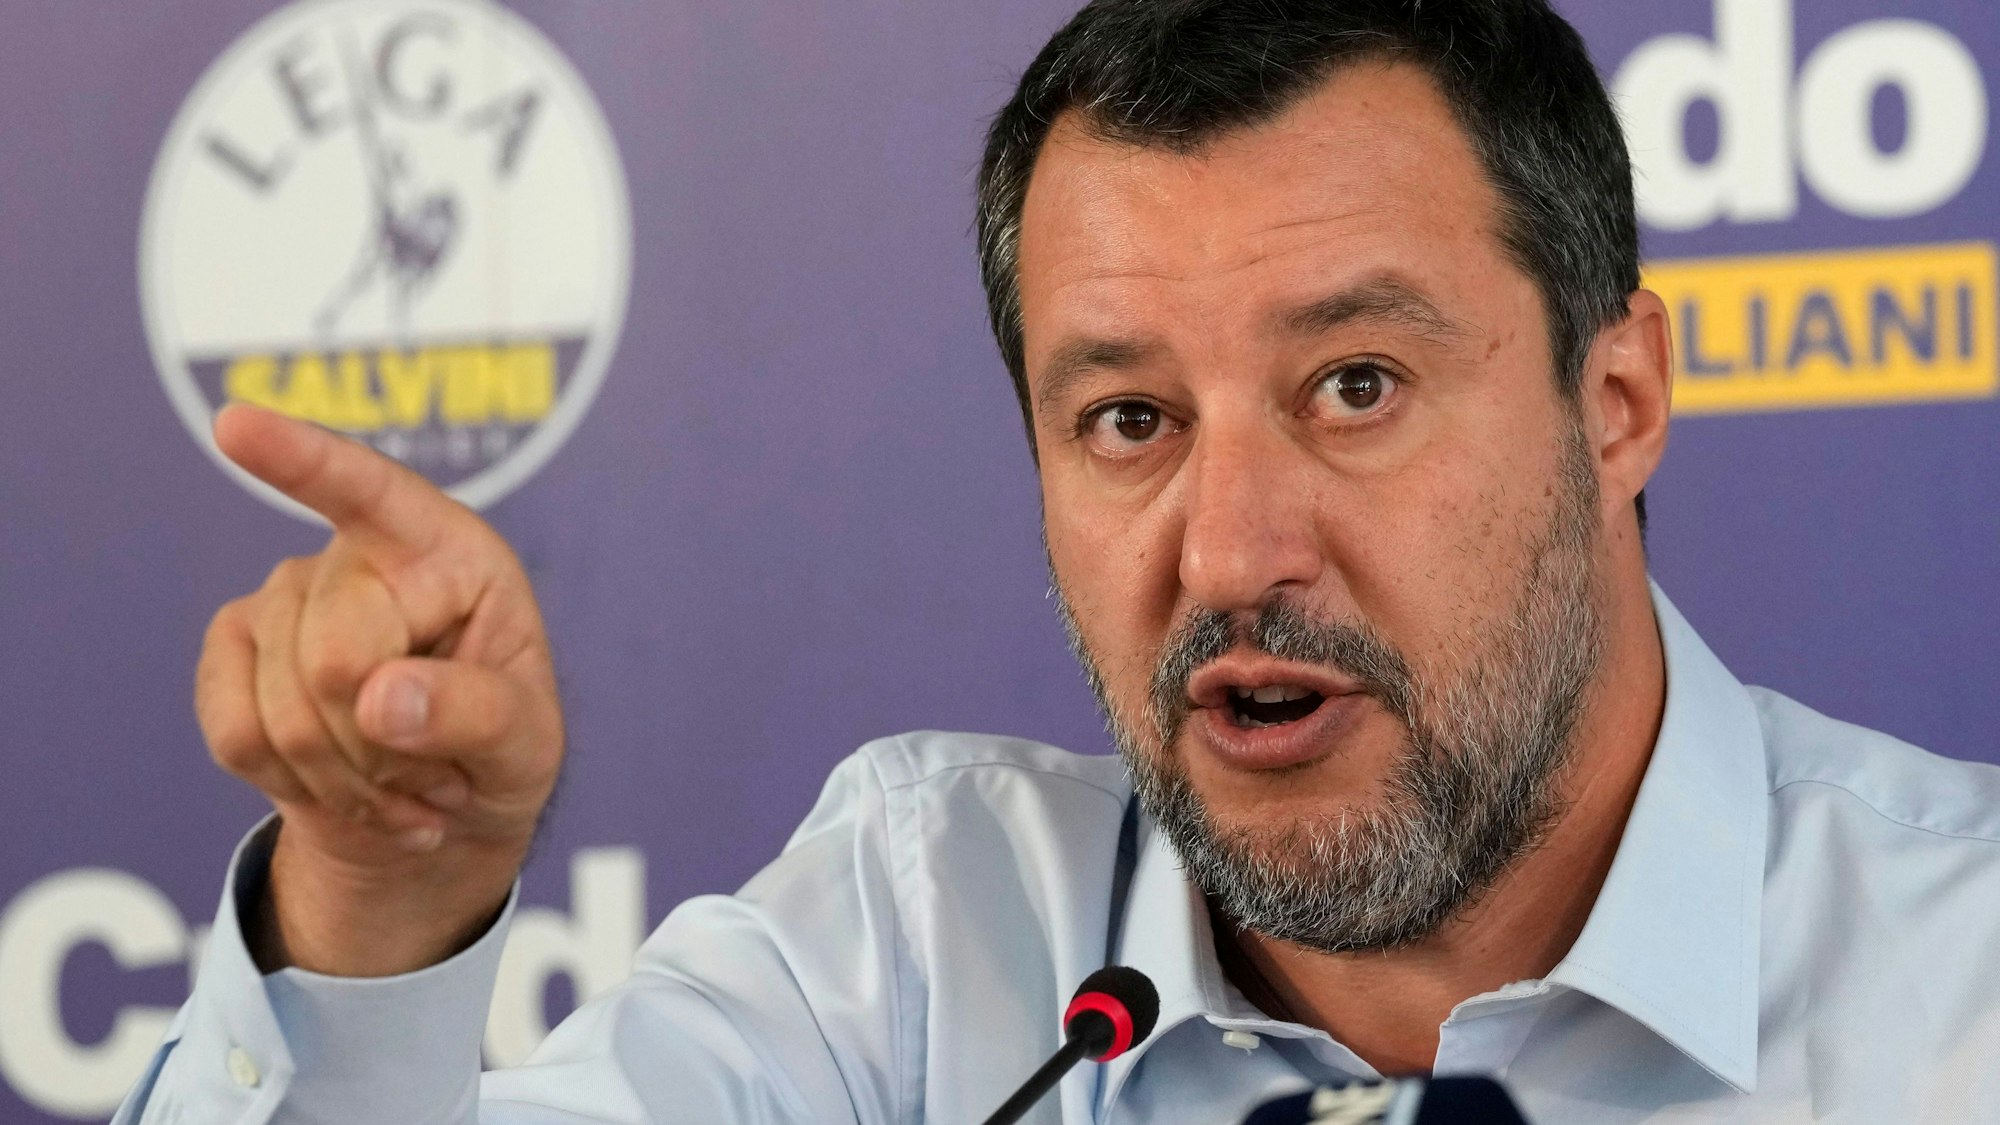 The League leader Matteo Salvini gestures during a news conference in Milan, Italy, Monday, Sept. 26, 2022. A party with neo-fascist roots, the Brothers of Italy, won the most votes in Italy's national elections, looking set to deliver the country's first far-right-led government since World War II and make its leader, Giorgia Meloni, Italy's first woman premier, near-final results showed Monday. (AP Photo/Antonio Calanni)